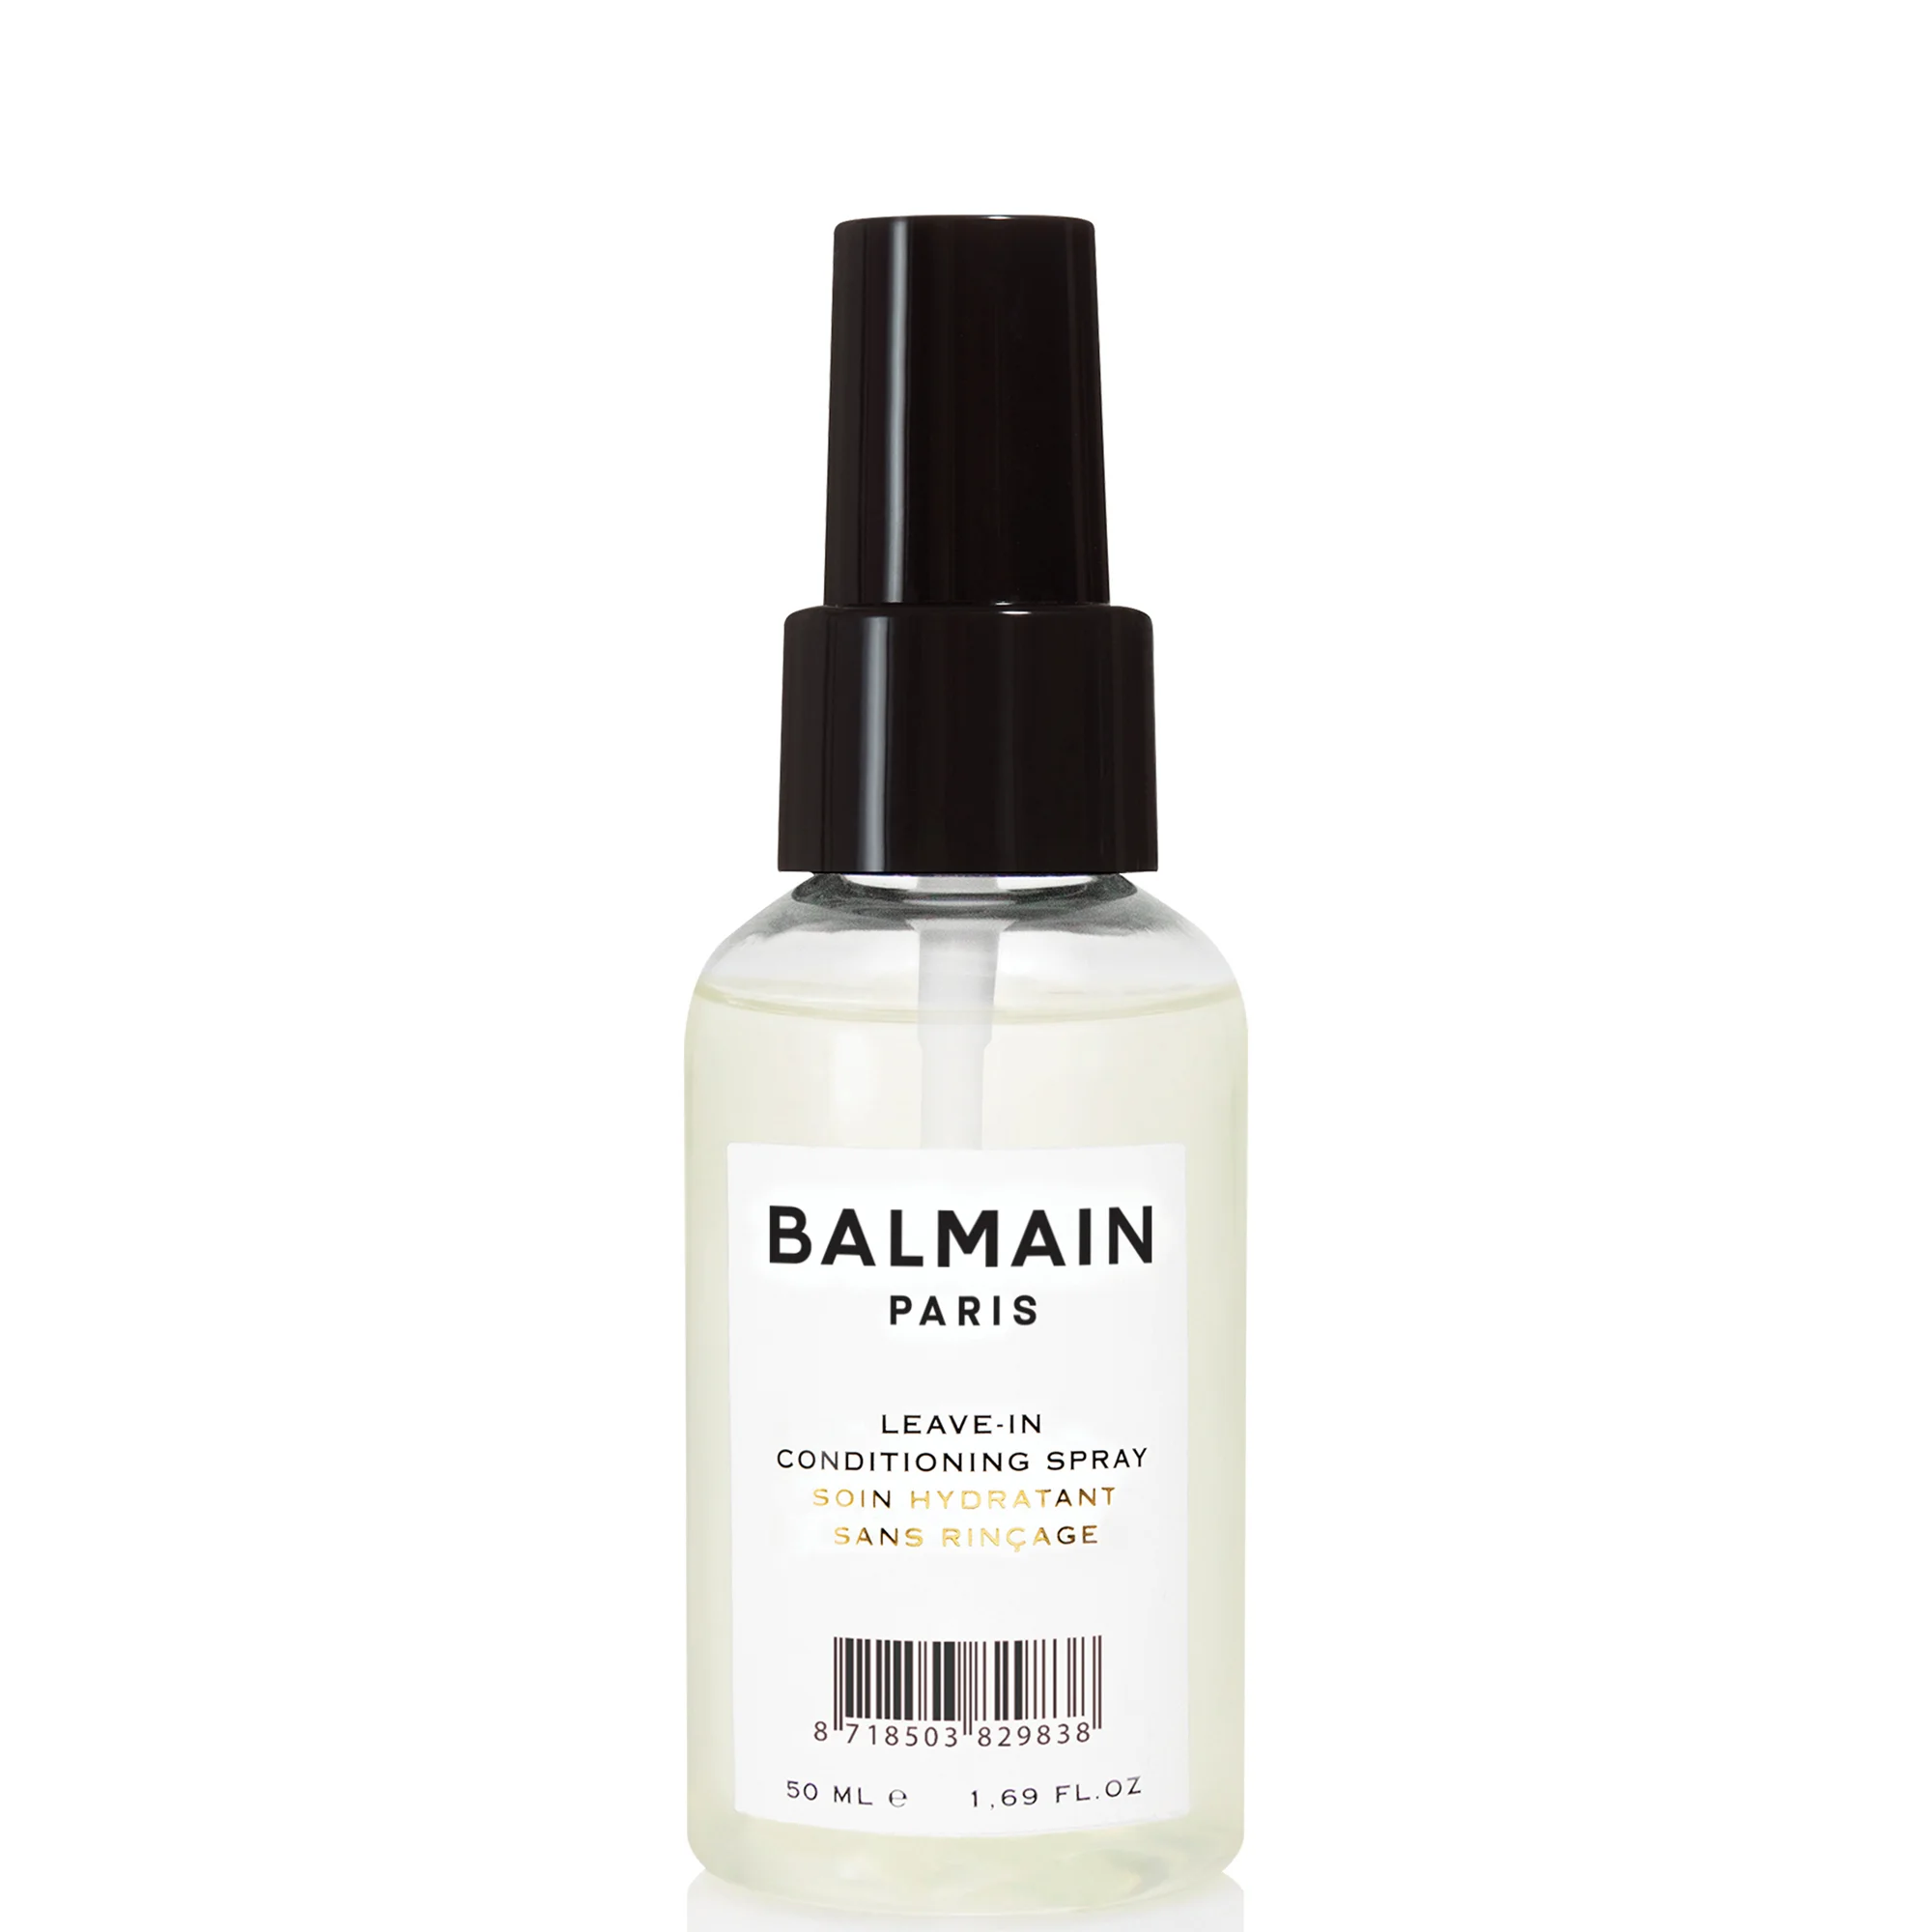 Balmain Hair Leave-In Conditioning Spray (50ml) (Travel Size) Image 1